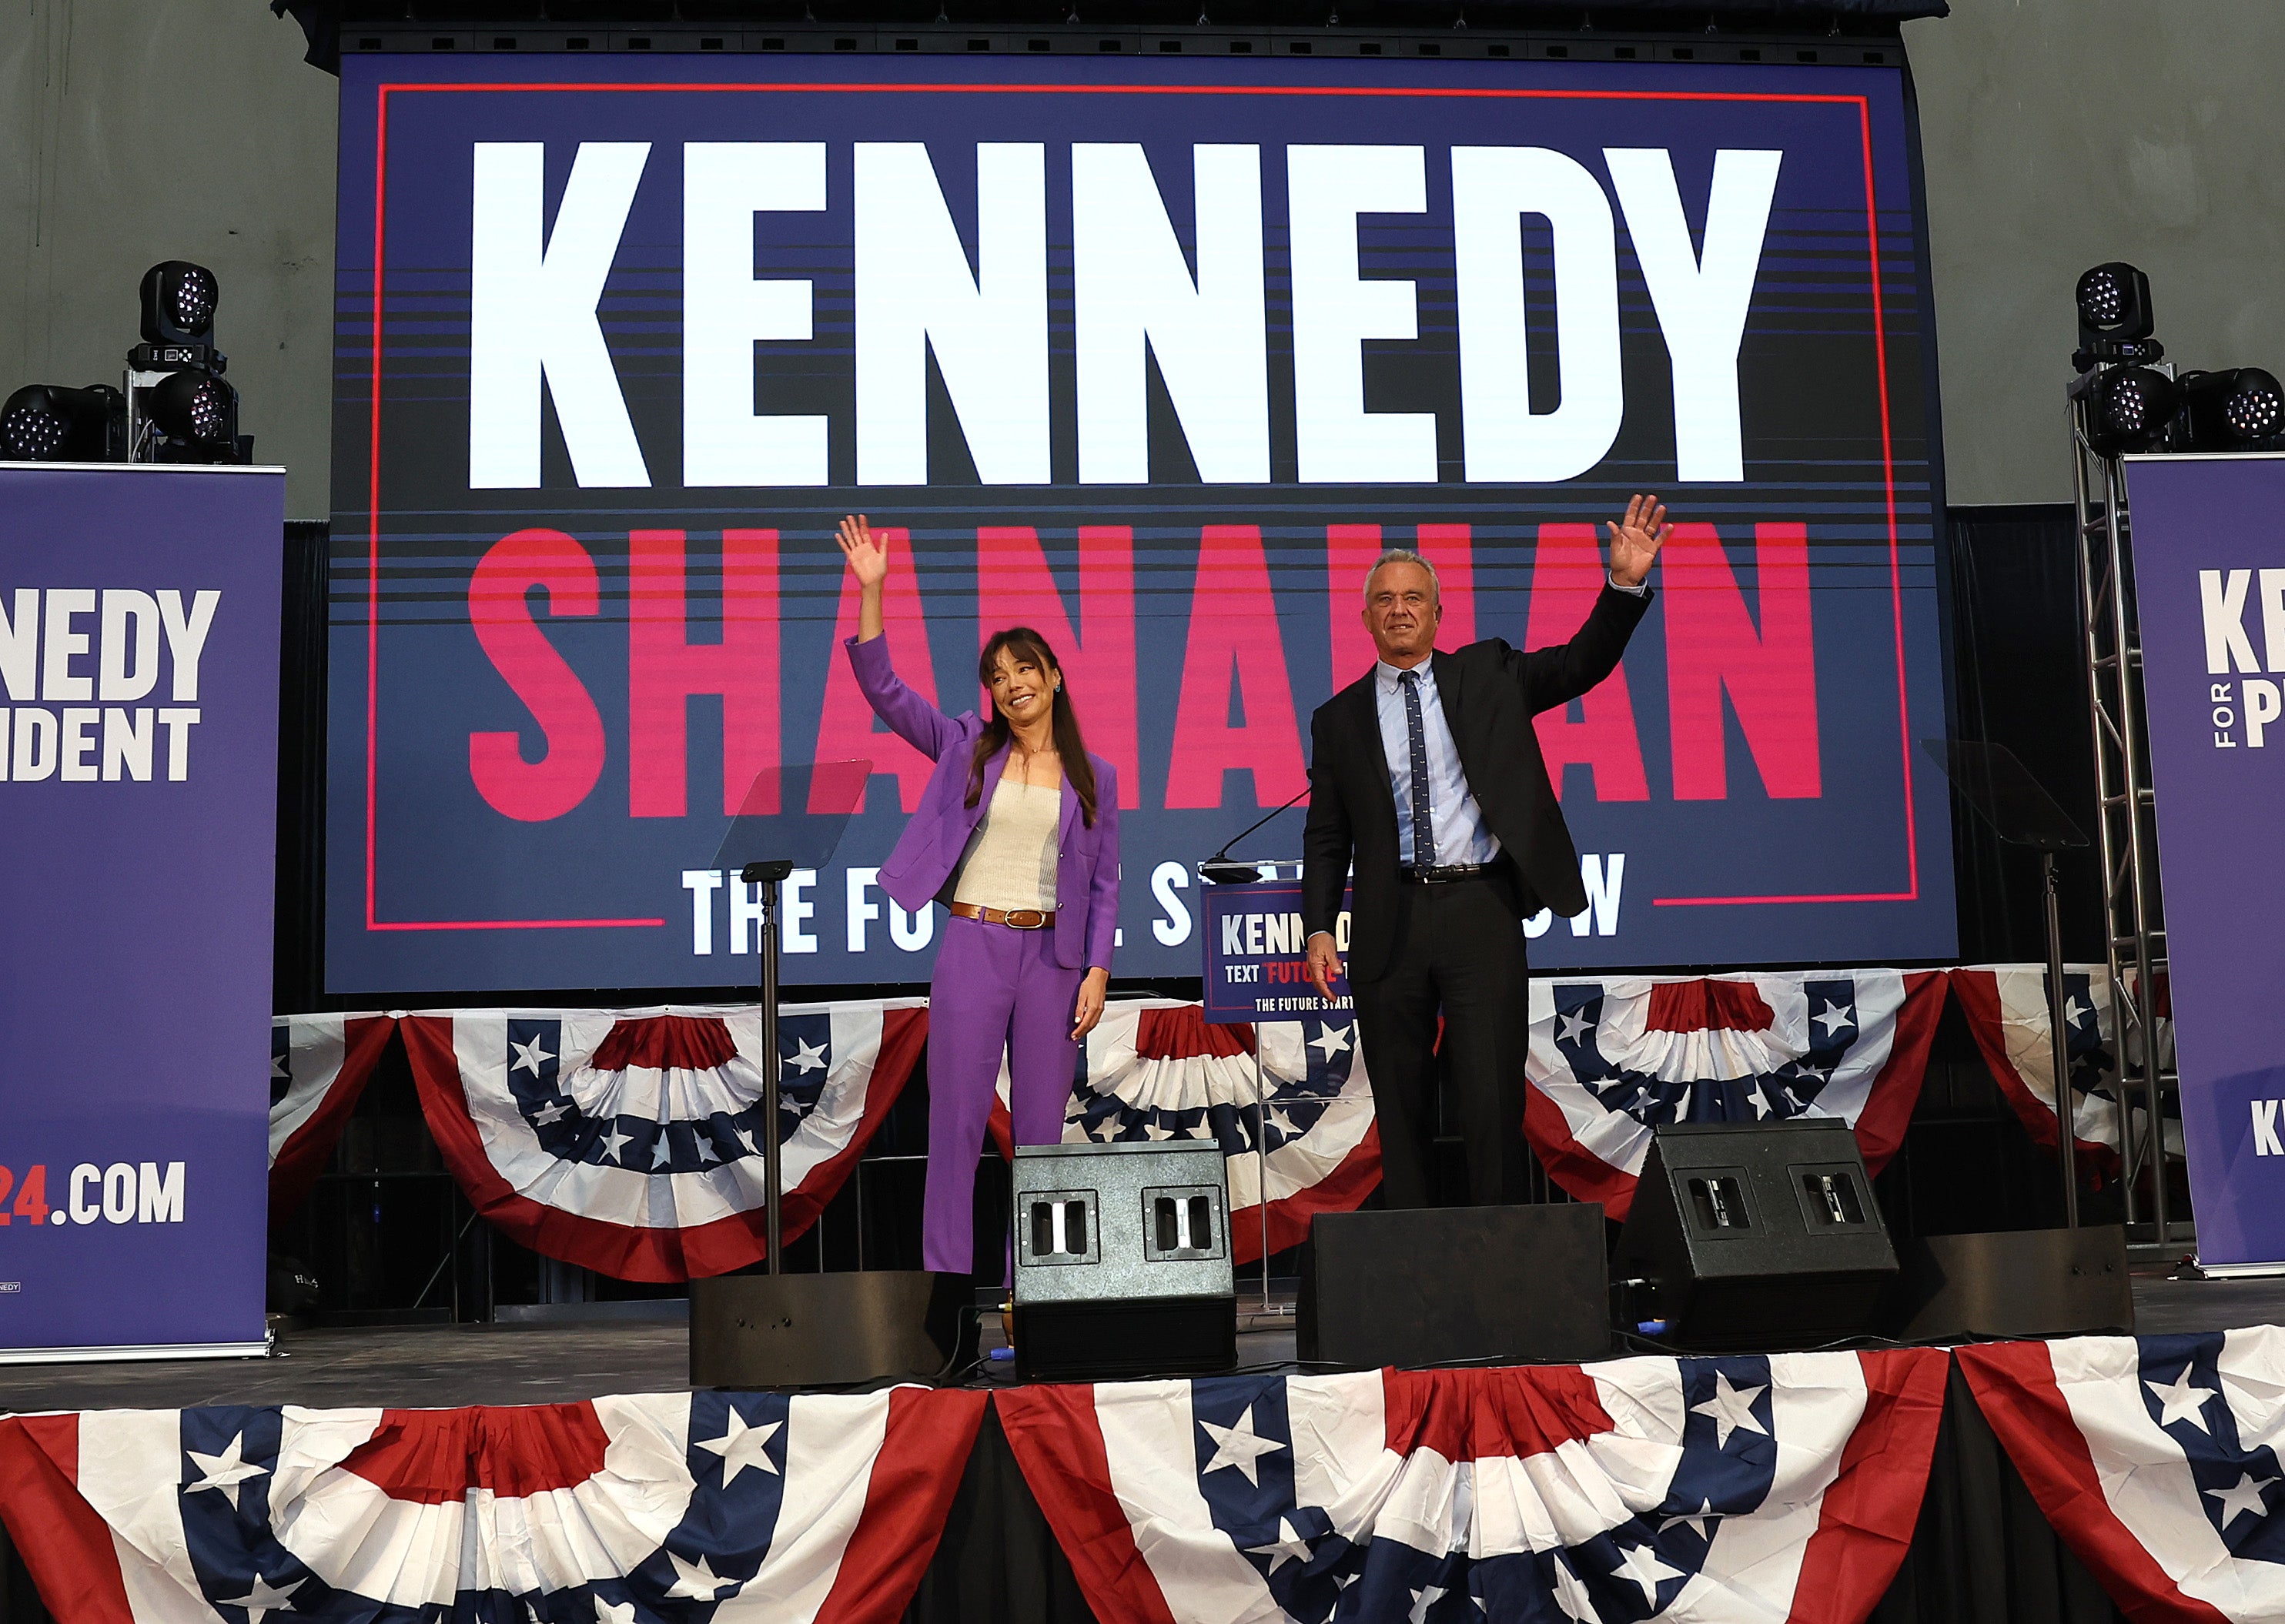 Nicole Shanahan (left) and Robert F Kennedy Jr (right) appear on stage together in March